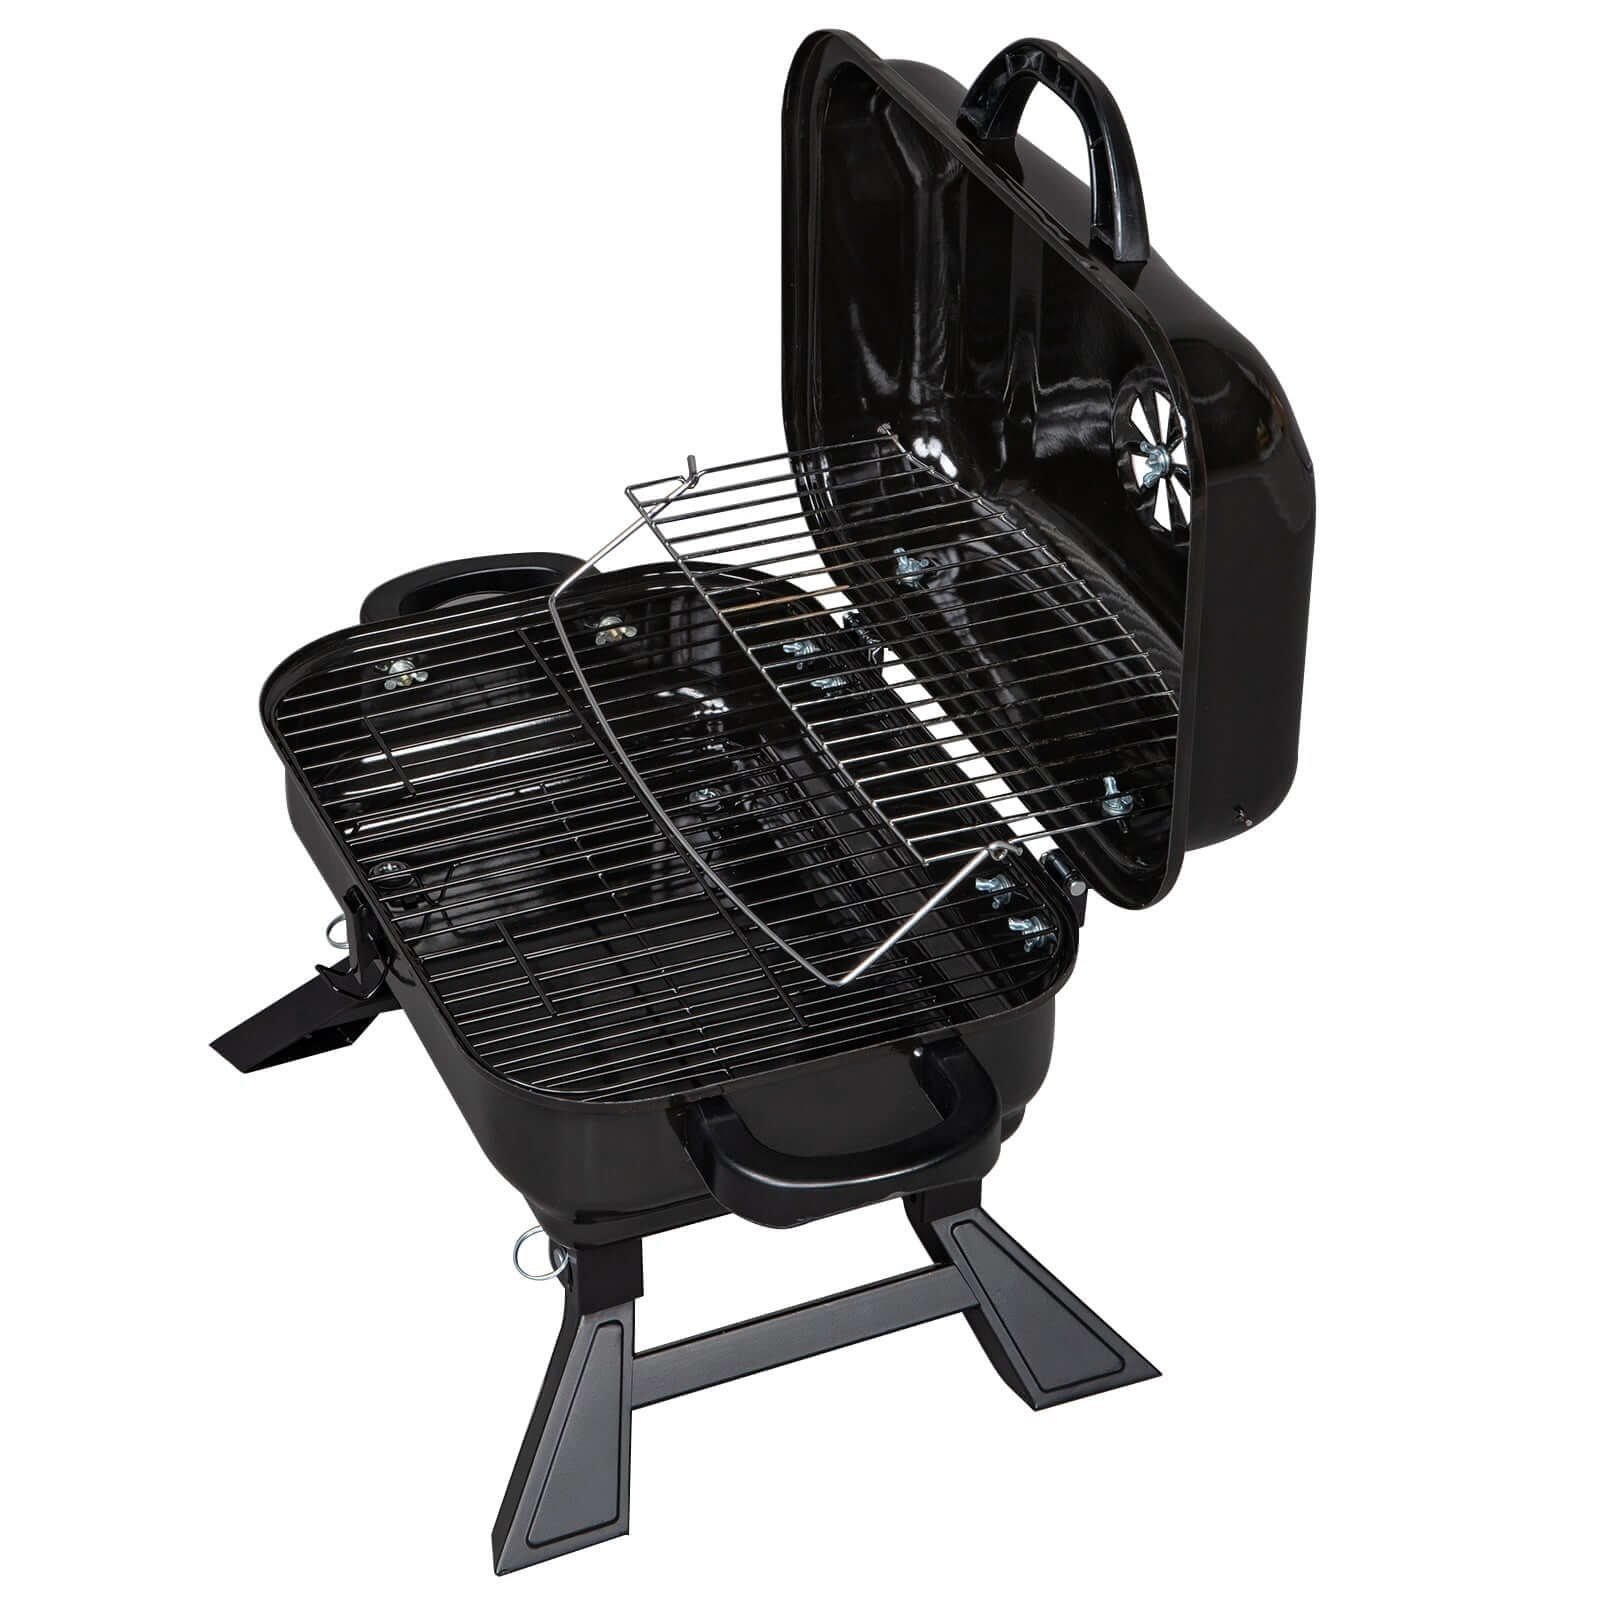 Portable Tabletop BBQ Charcoal Grill for Perfect Outdoor Cooking